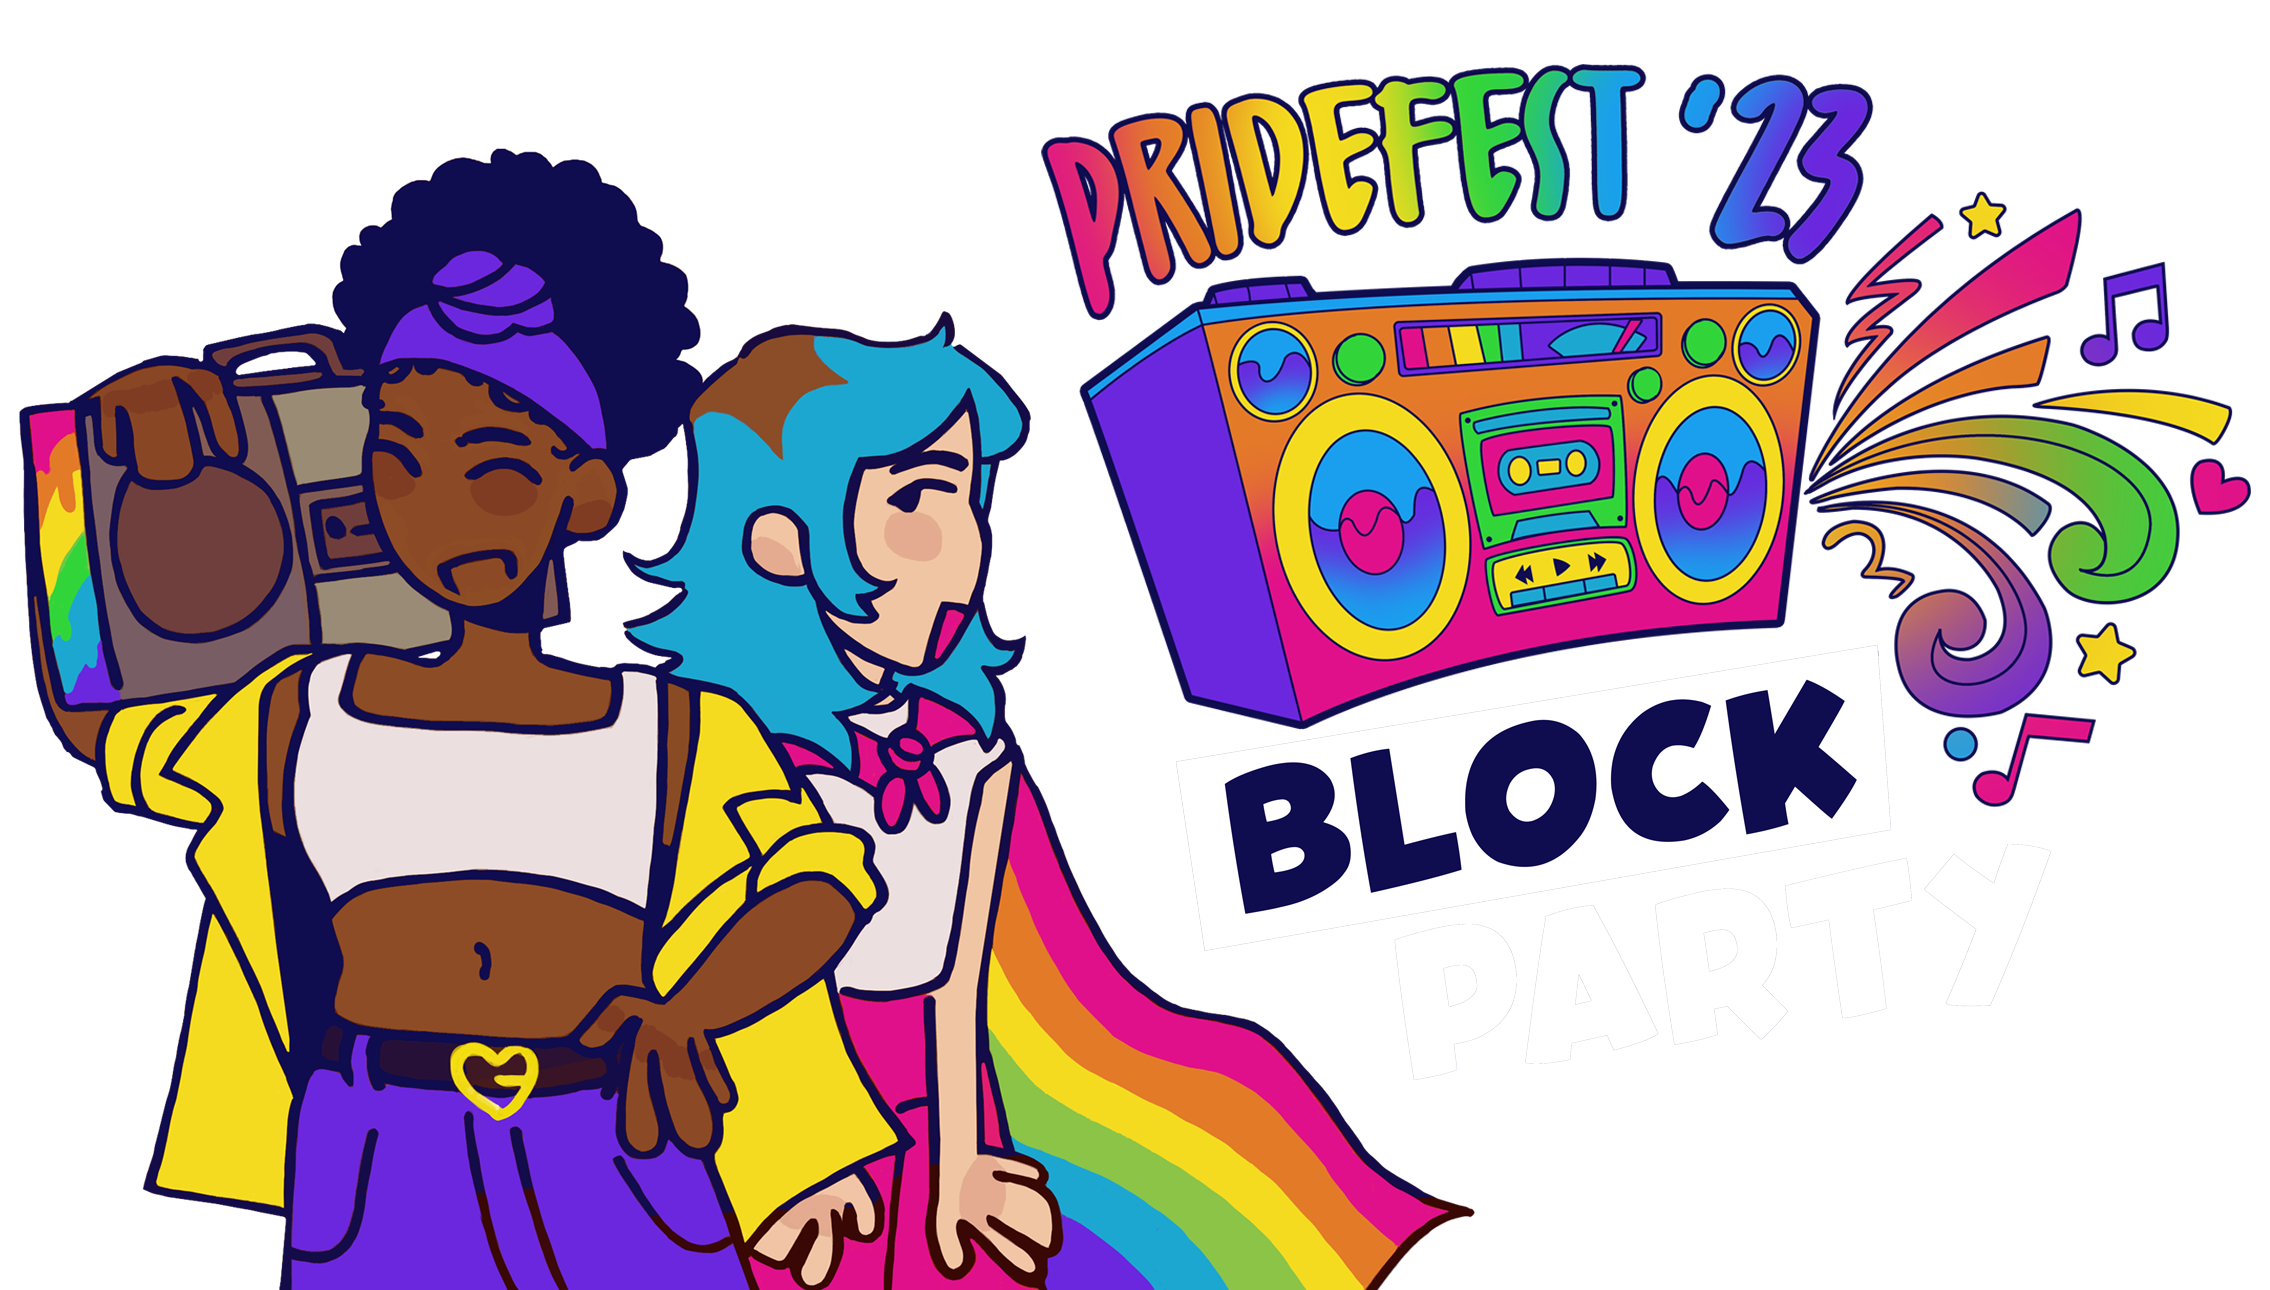 Pridefest '23 Block Party. A Black girl holding up a boombox and a blue haired pale/white person wearing a rainbow cape smiling. Text that says Pridefest '23 Block Party around a rainbow colored boombox that has swirls and music notes coming out of the speaker.